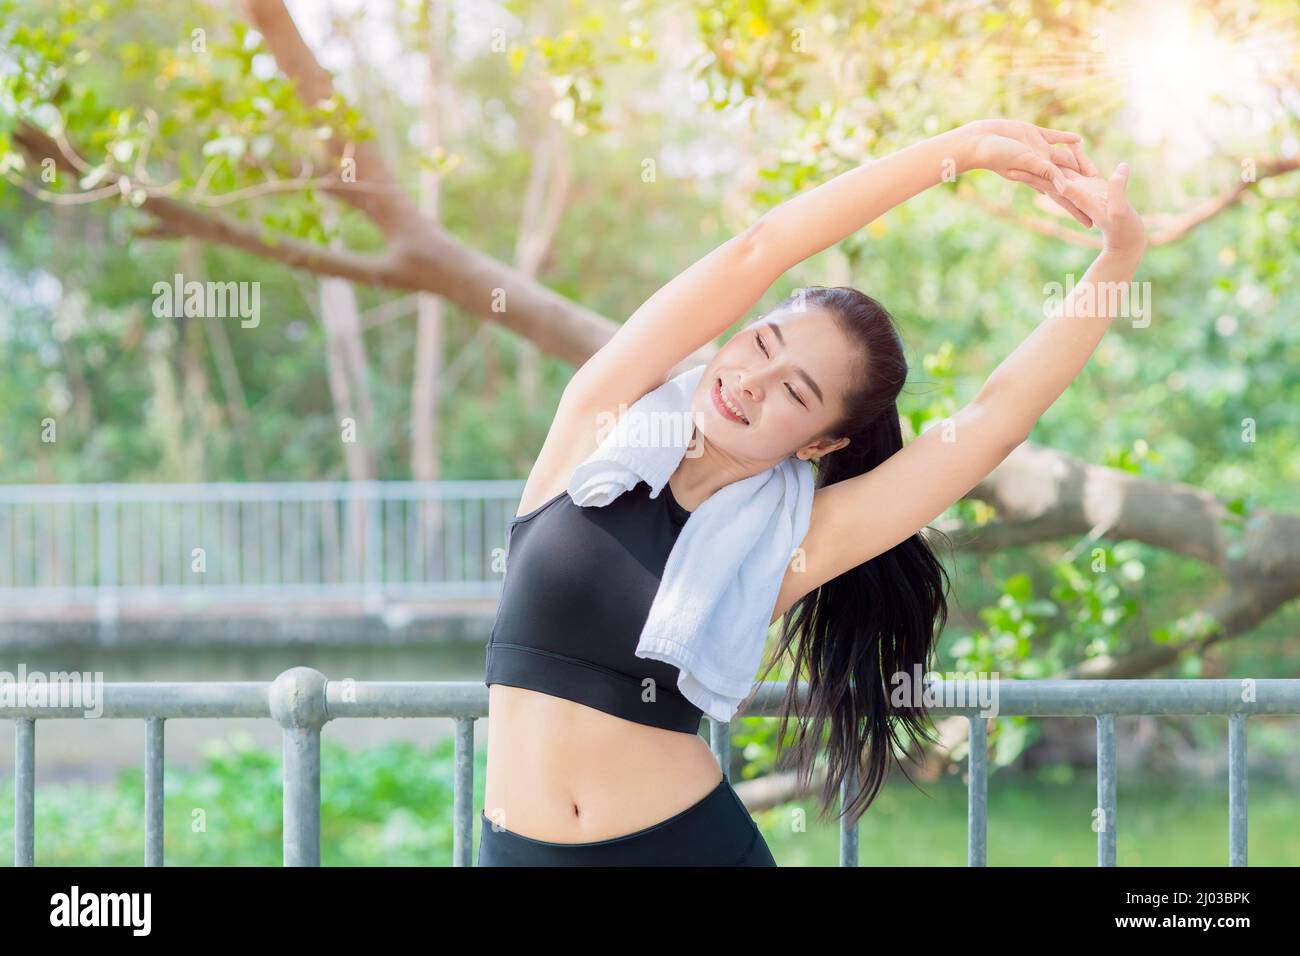 healthy woman morning exercise fitness with fresh green tree park outdoor background Stock Photo